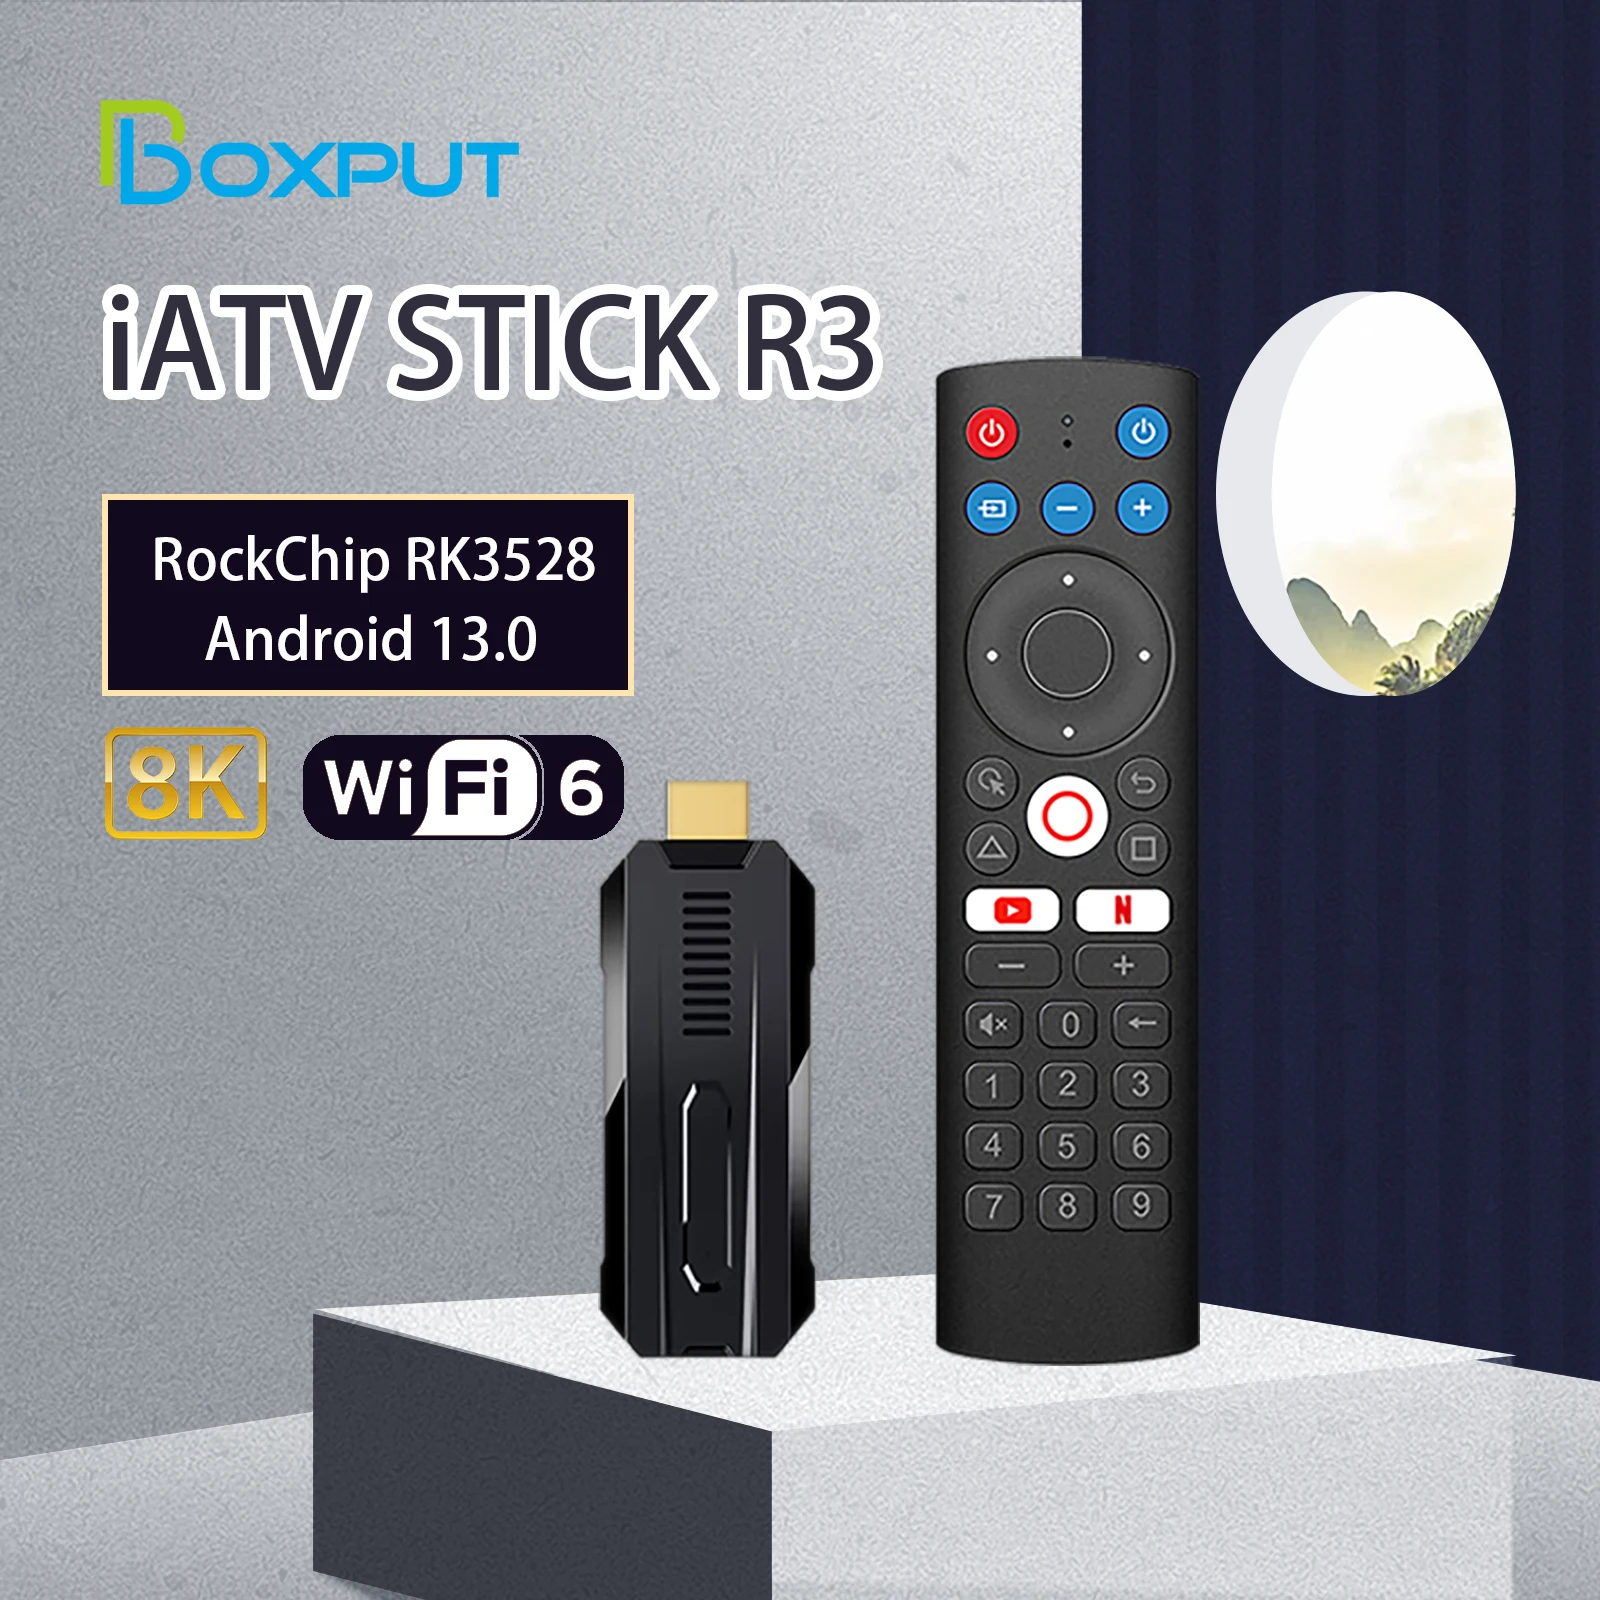 BOXPUT Android 13.0 iATV R3 Fire TV Stick RockChip RK3528 8K Portable TVbox 2.4G/5G WiFi6 BT5.0 OTG TF Slot With Screencasting kids fire trucks toy pullback fire engine toy trucks with friction power classic red and white rolling emergencies vehicle